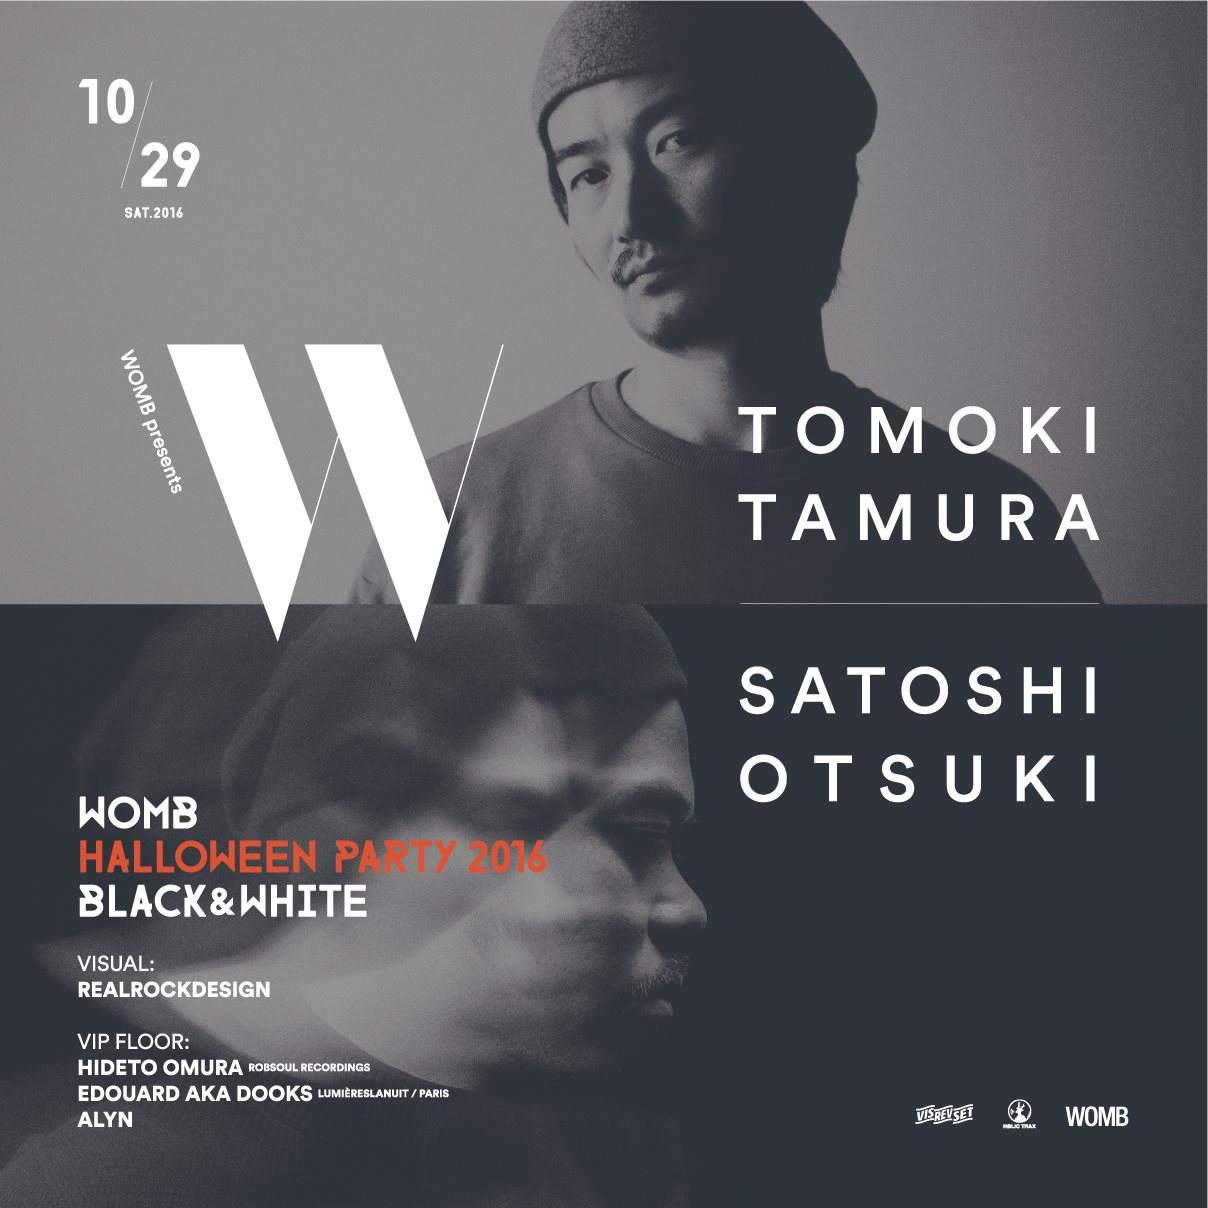 Womb Halloween Party 2016 -Womb presents W- - フライヤー表